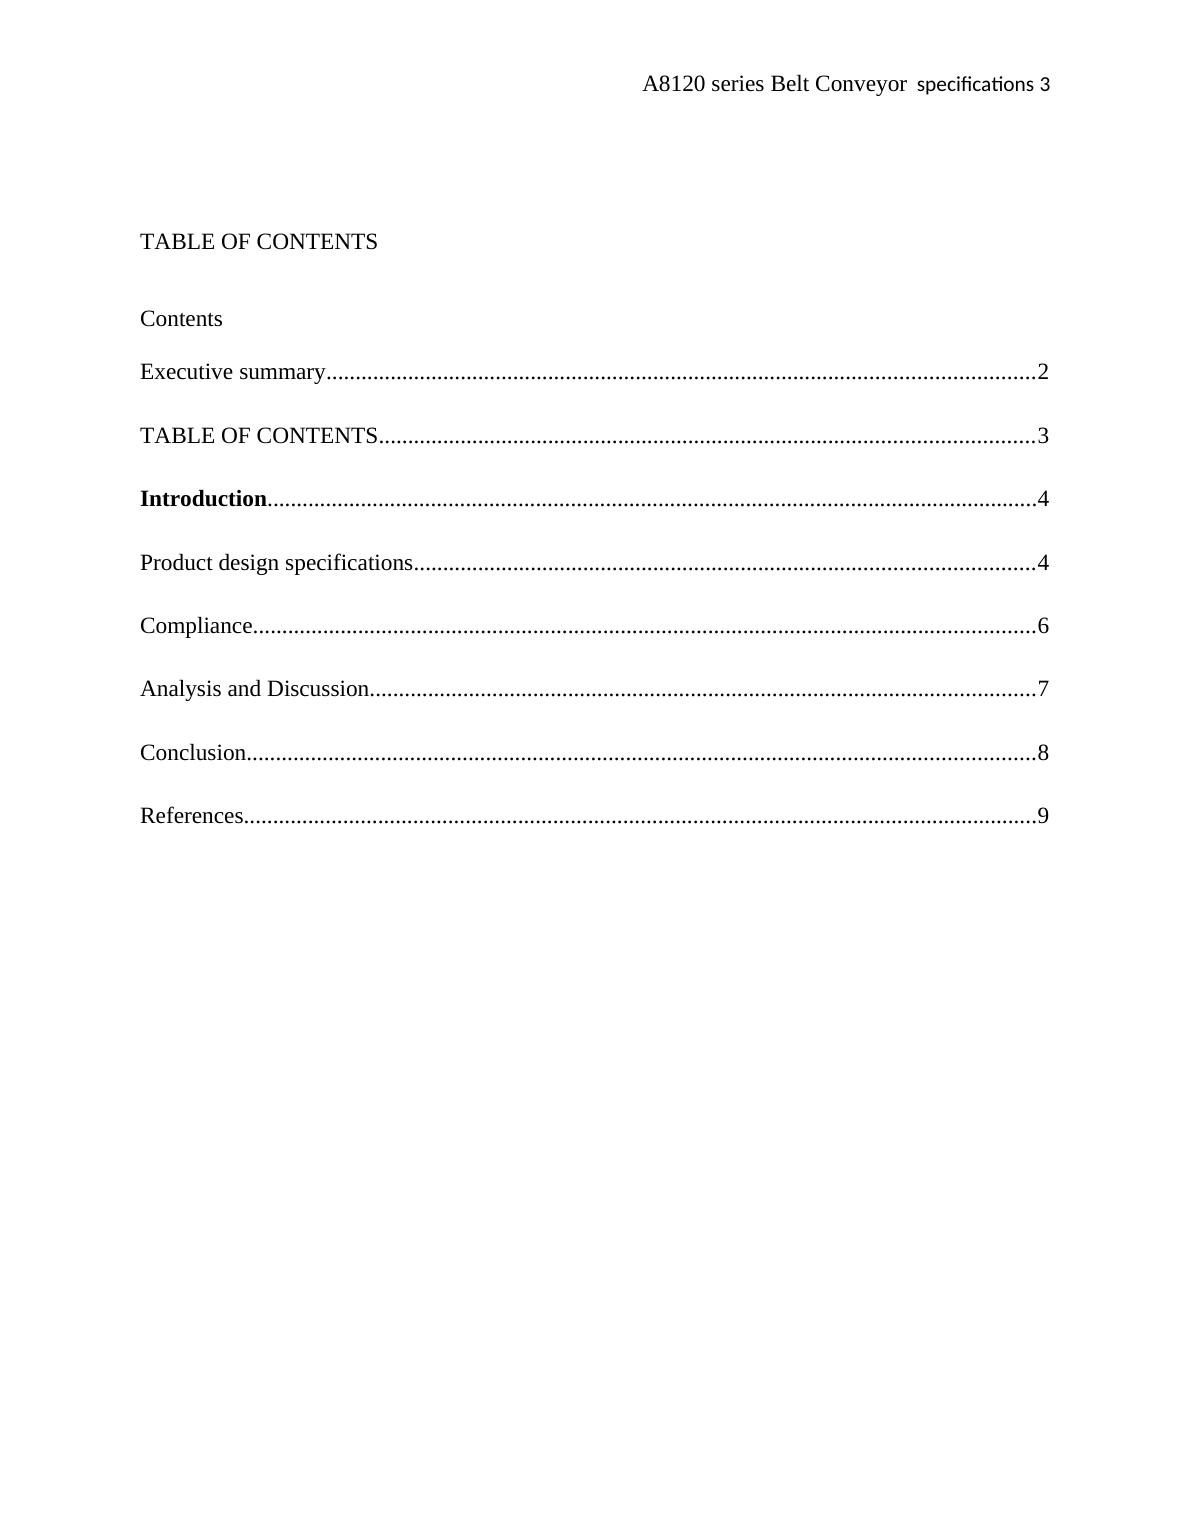 Document on Market Research of A8120 series Belt Conveyor_3